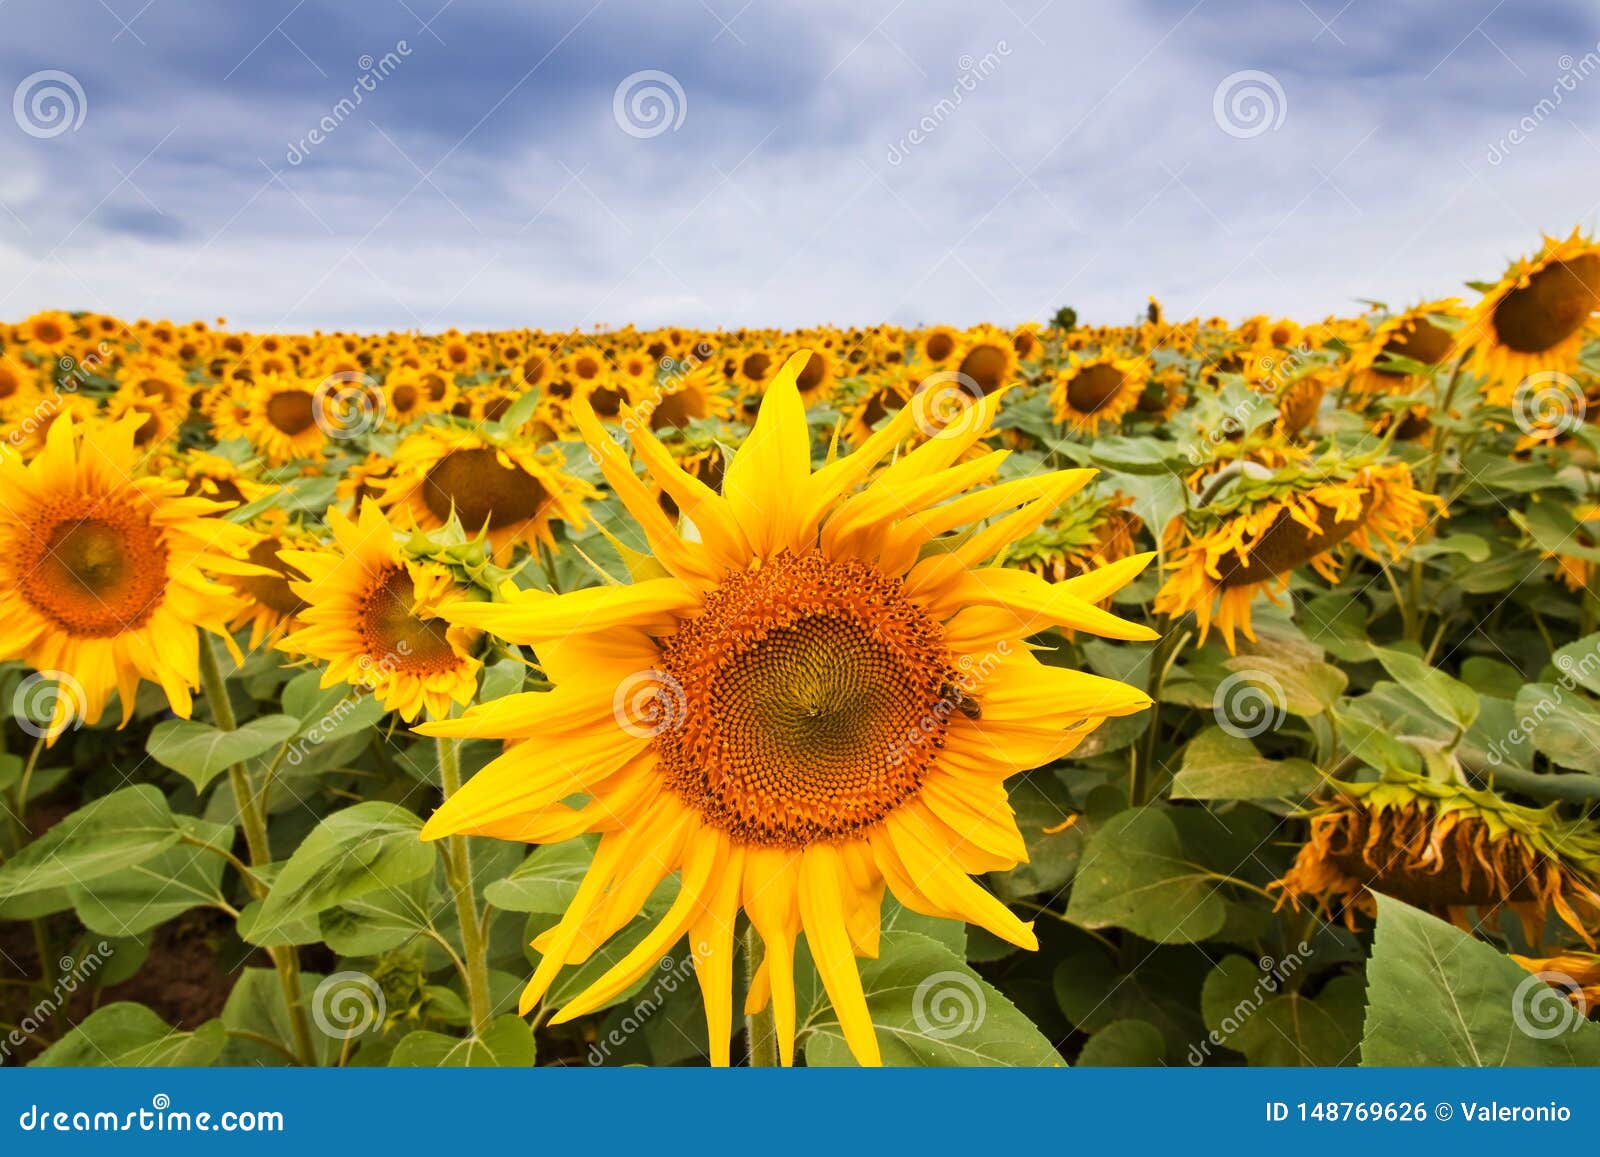 sunflower blossom with a bee gather nectar, heavy clouds in the sky before thunderstorm, shadowless creative  pattern